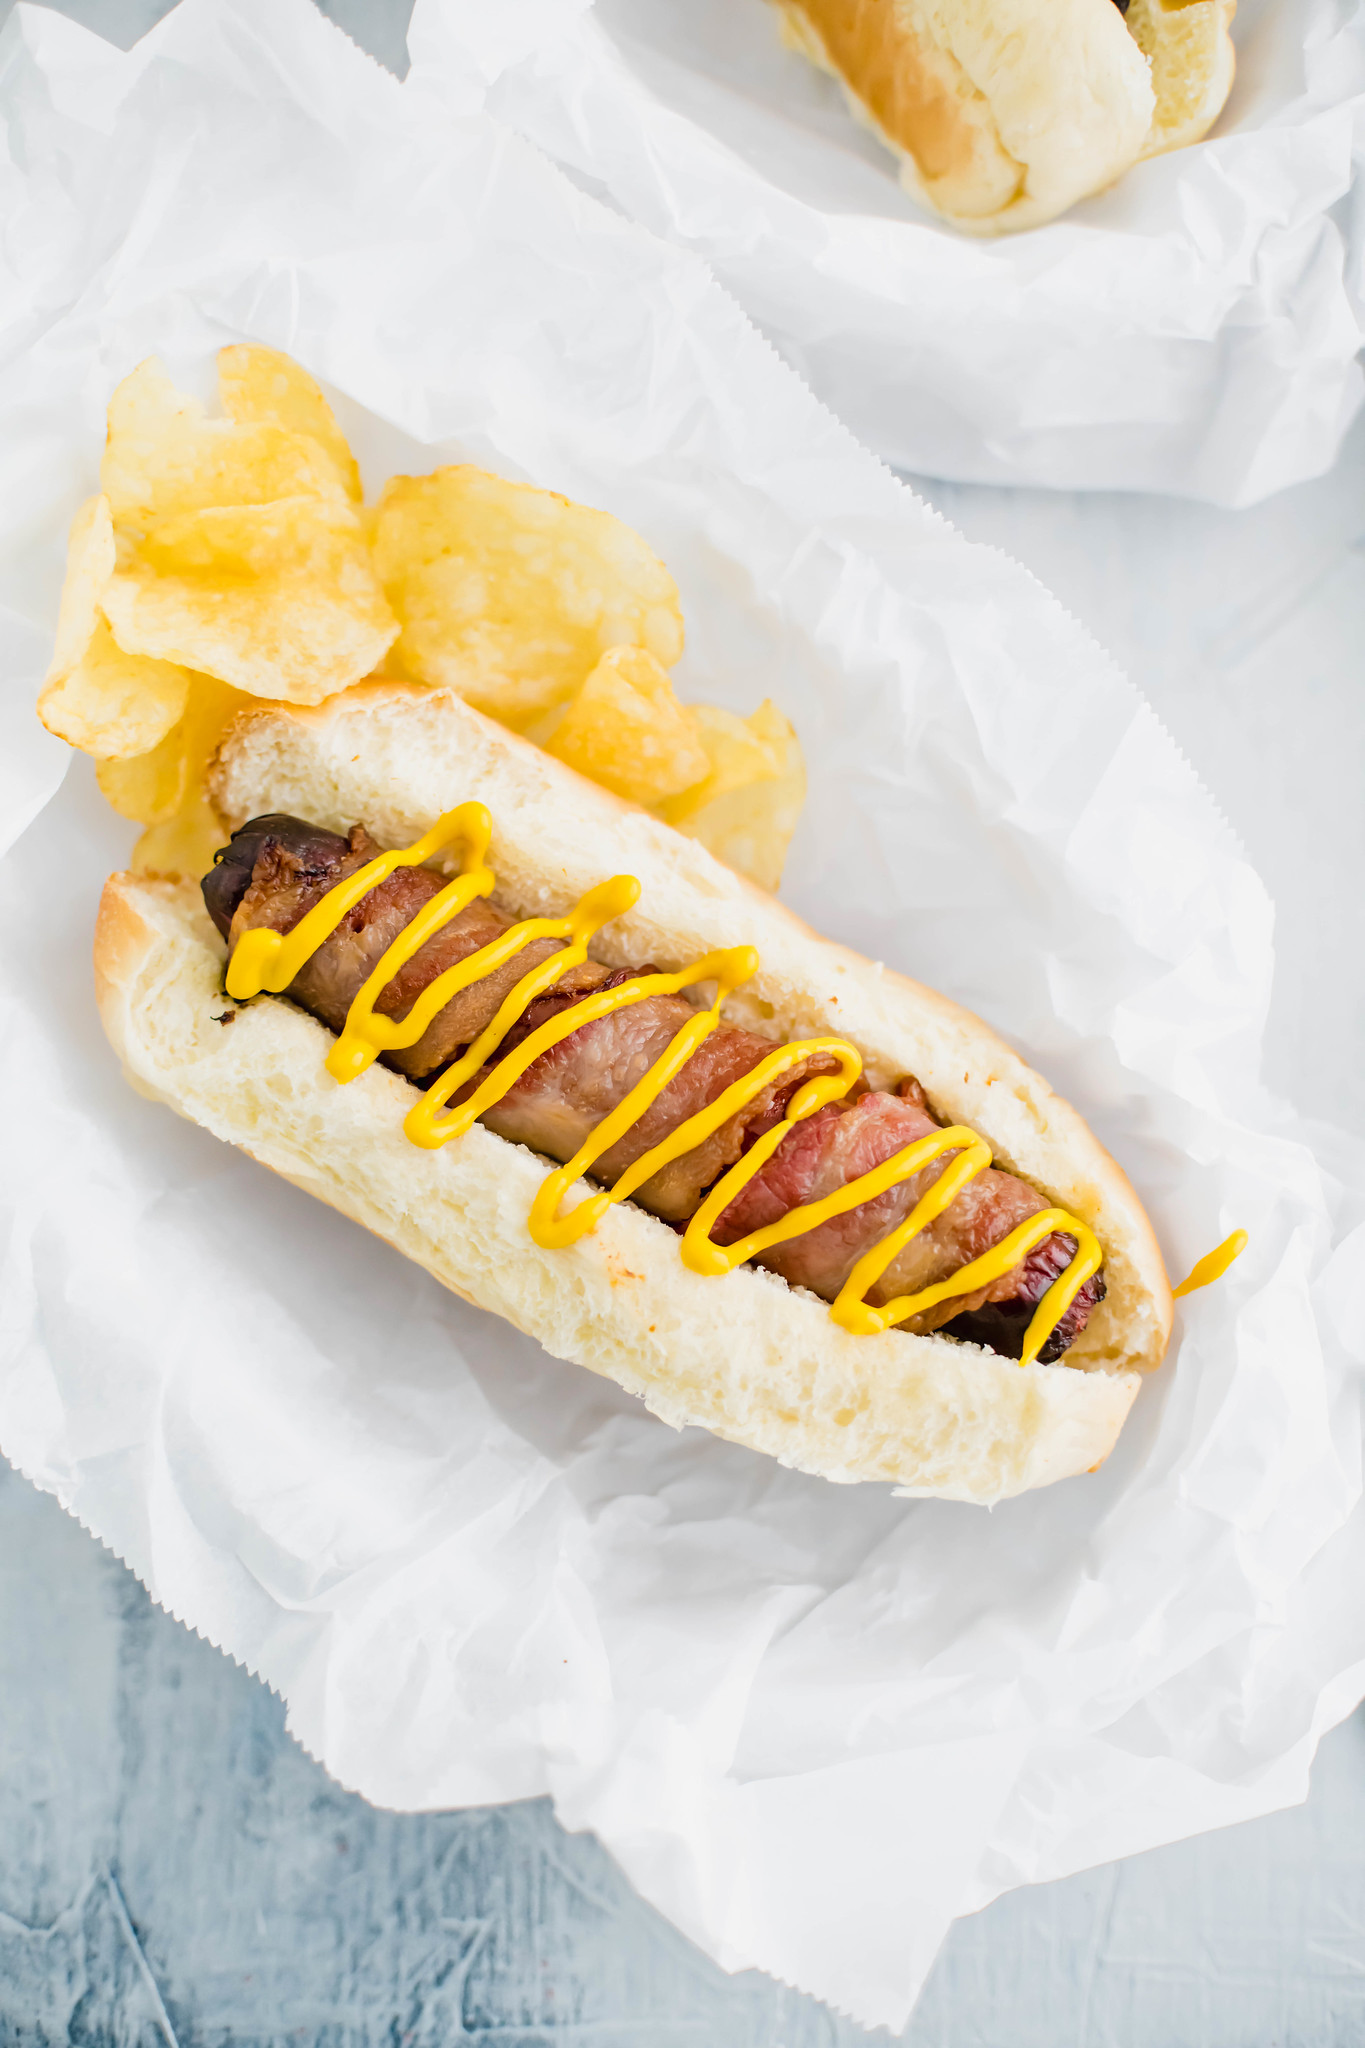 bacon wrapped air fryer hot dog in a bun drizzled with yellow mustard and chips on the side